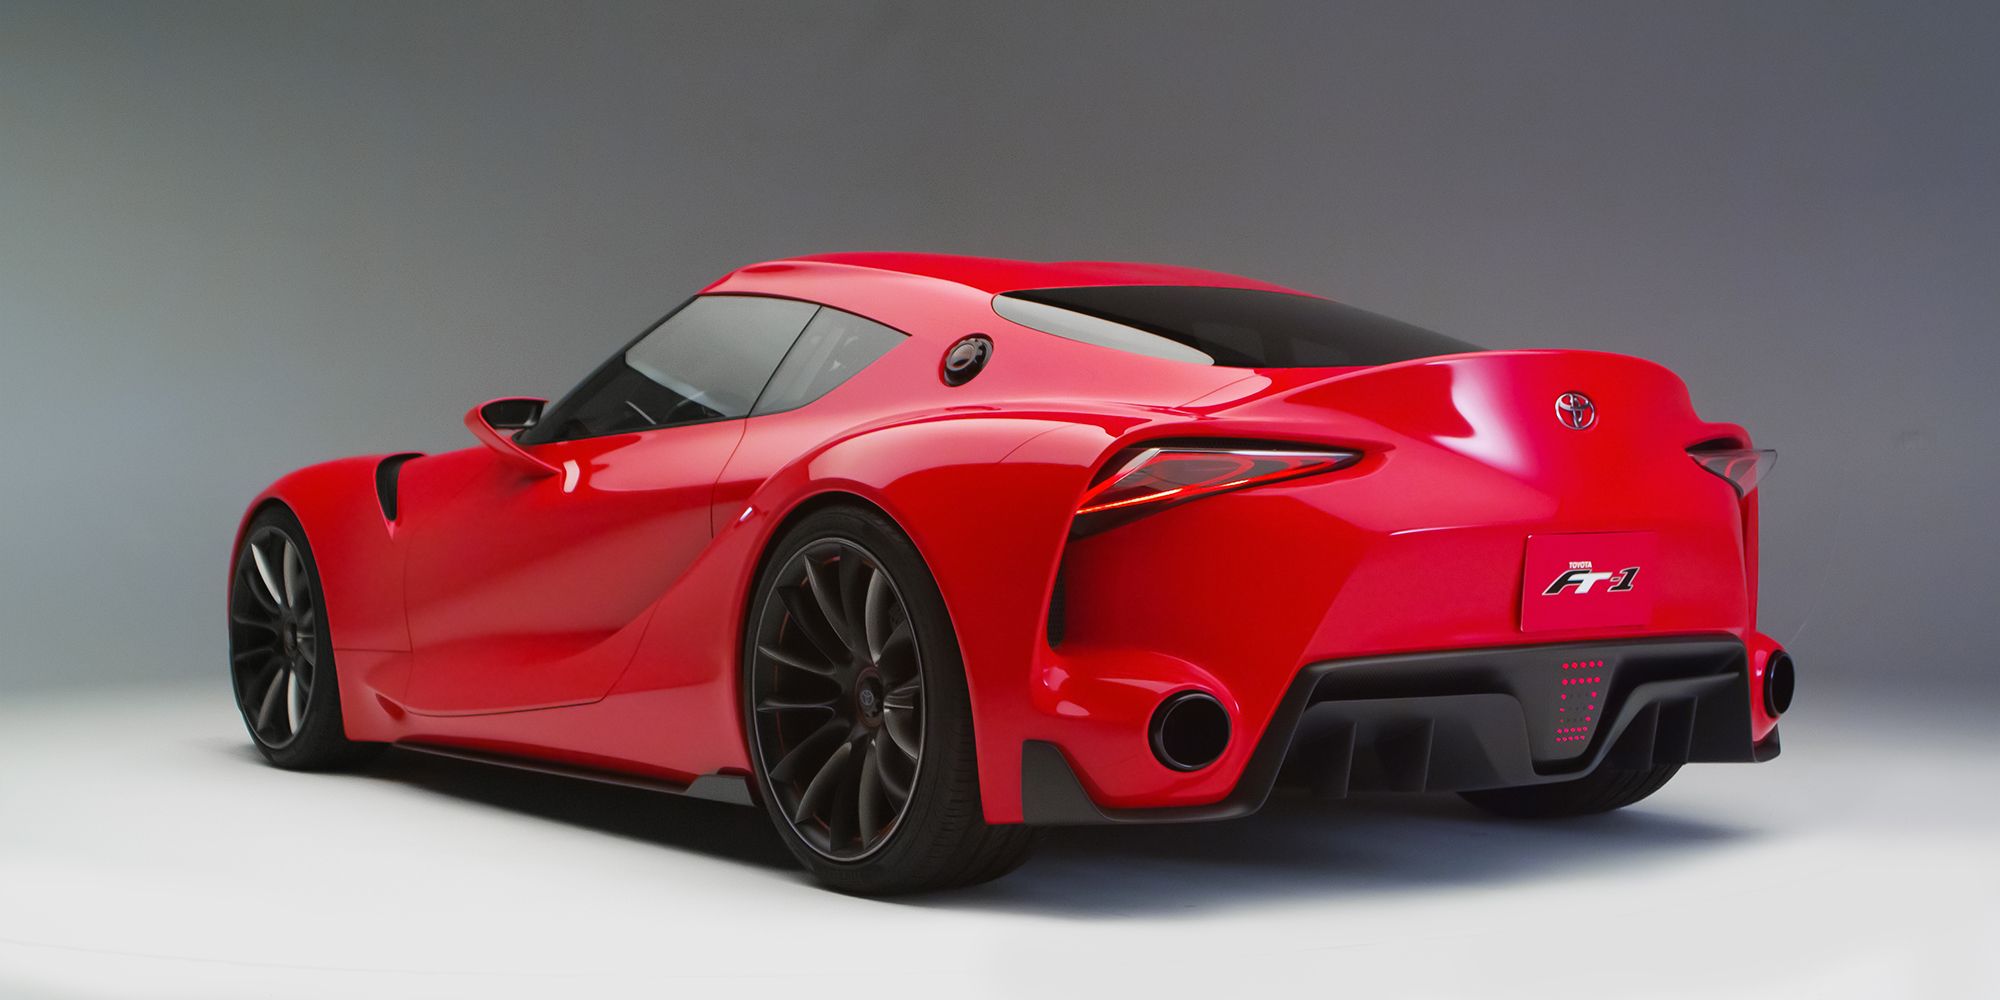 The rear of the FT-1 Concept